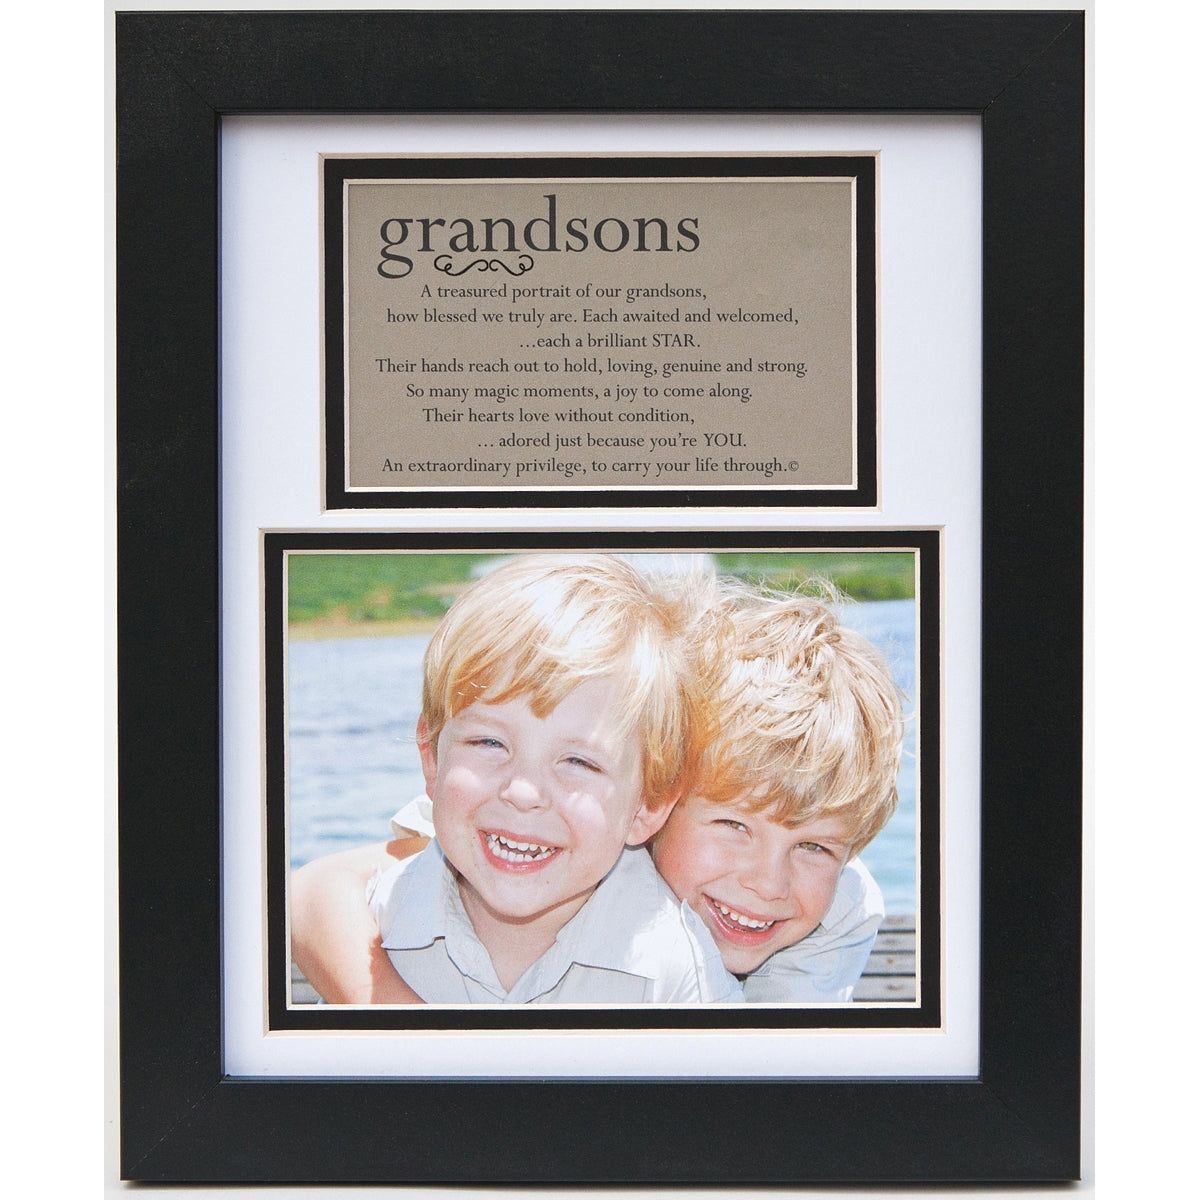 8x10 black frame with white and black double mat, includes "Grandsons" poem and space for photo.